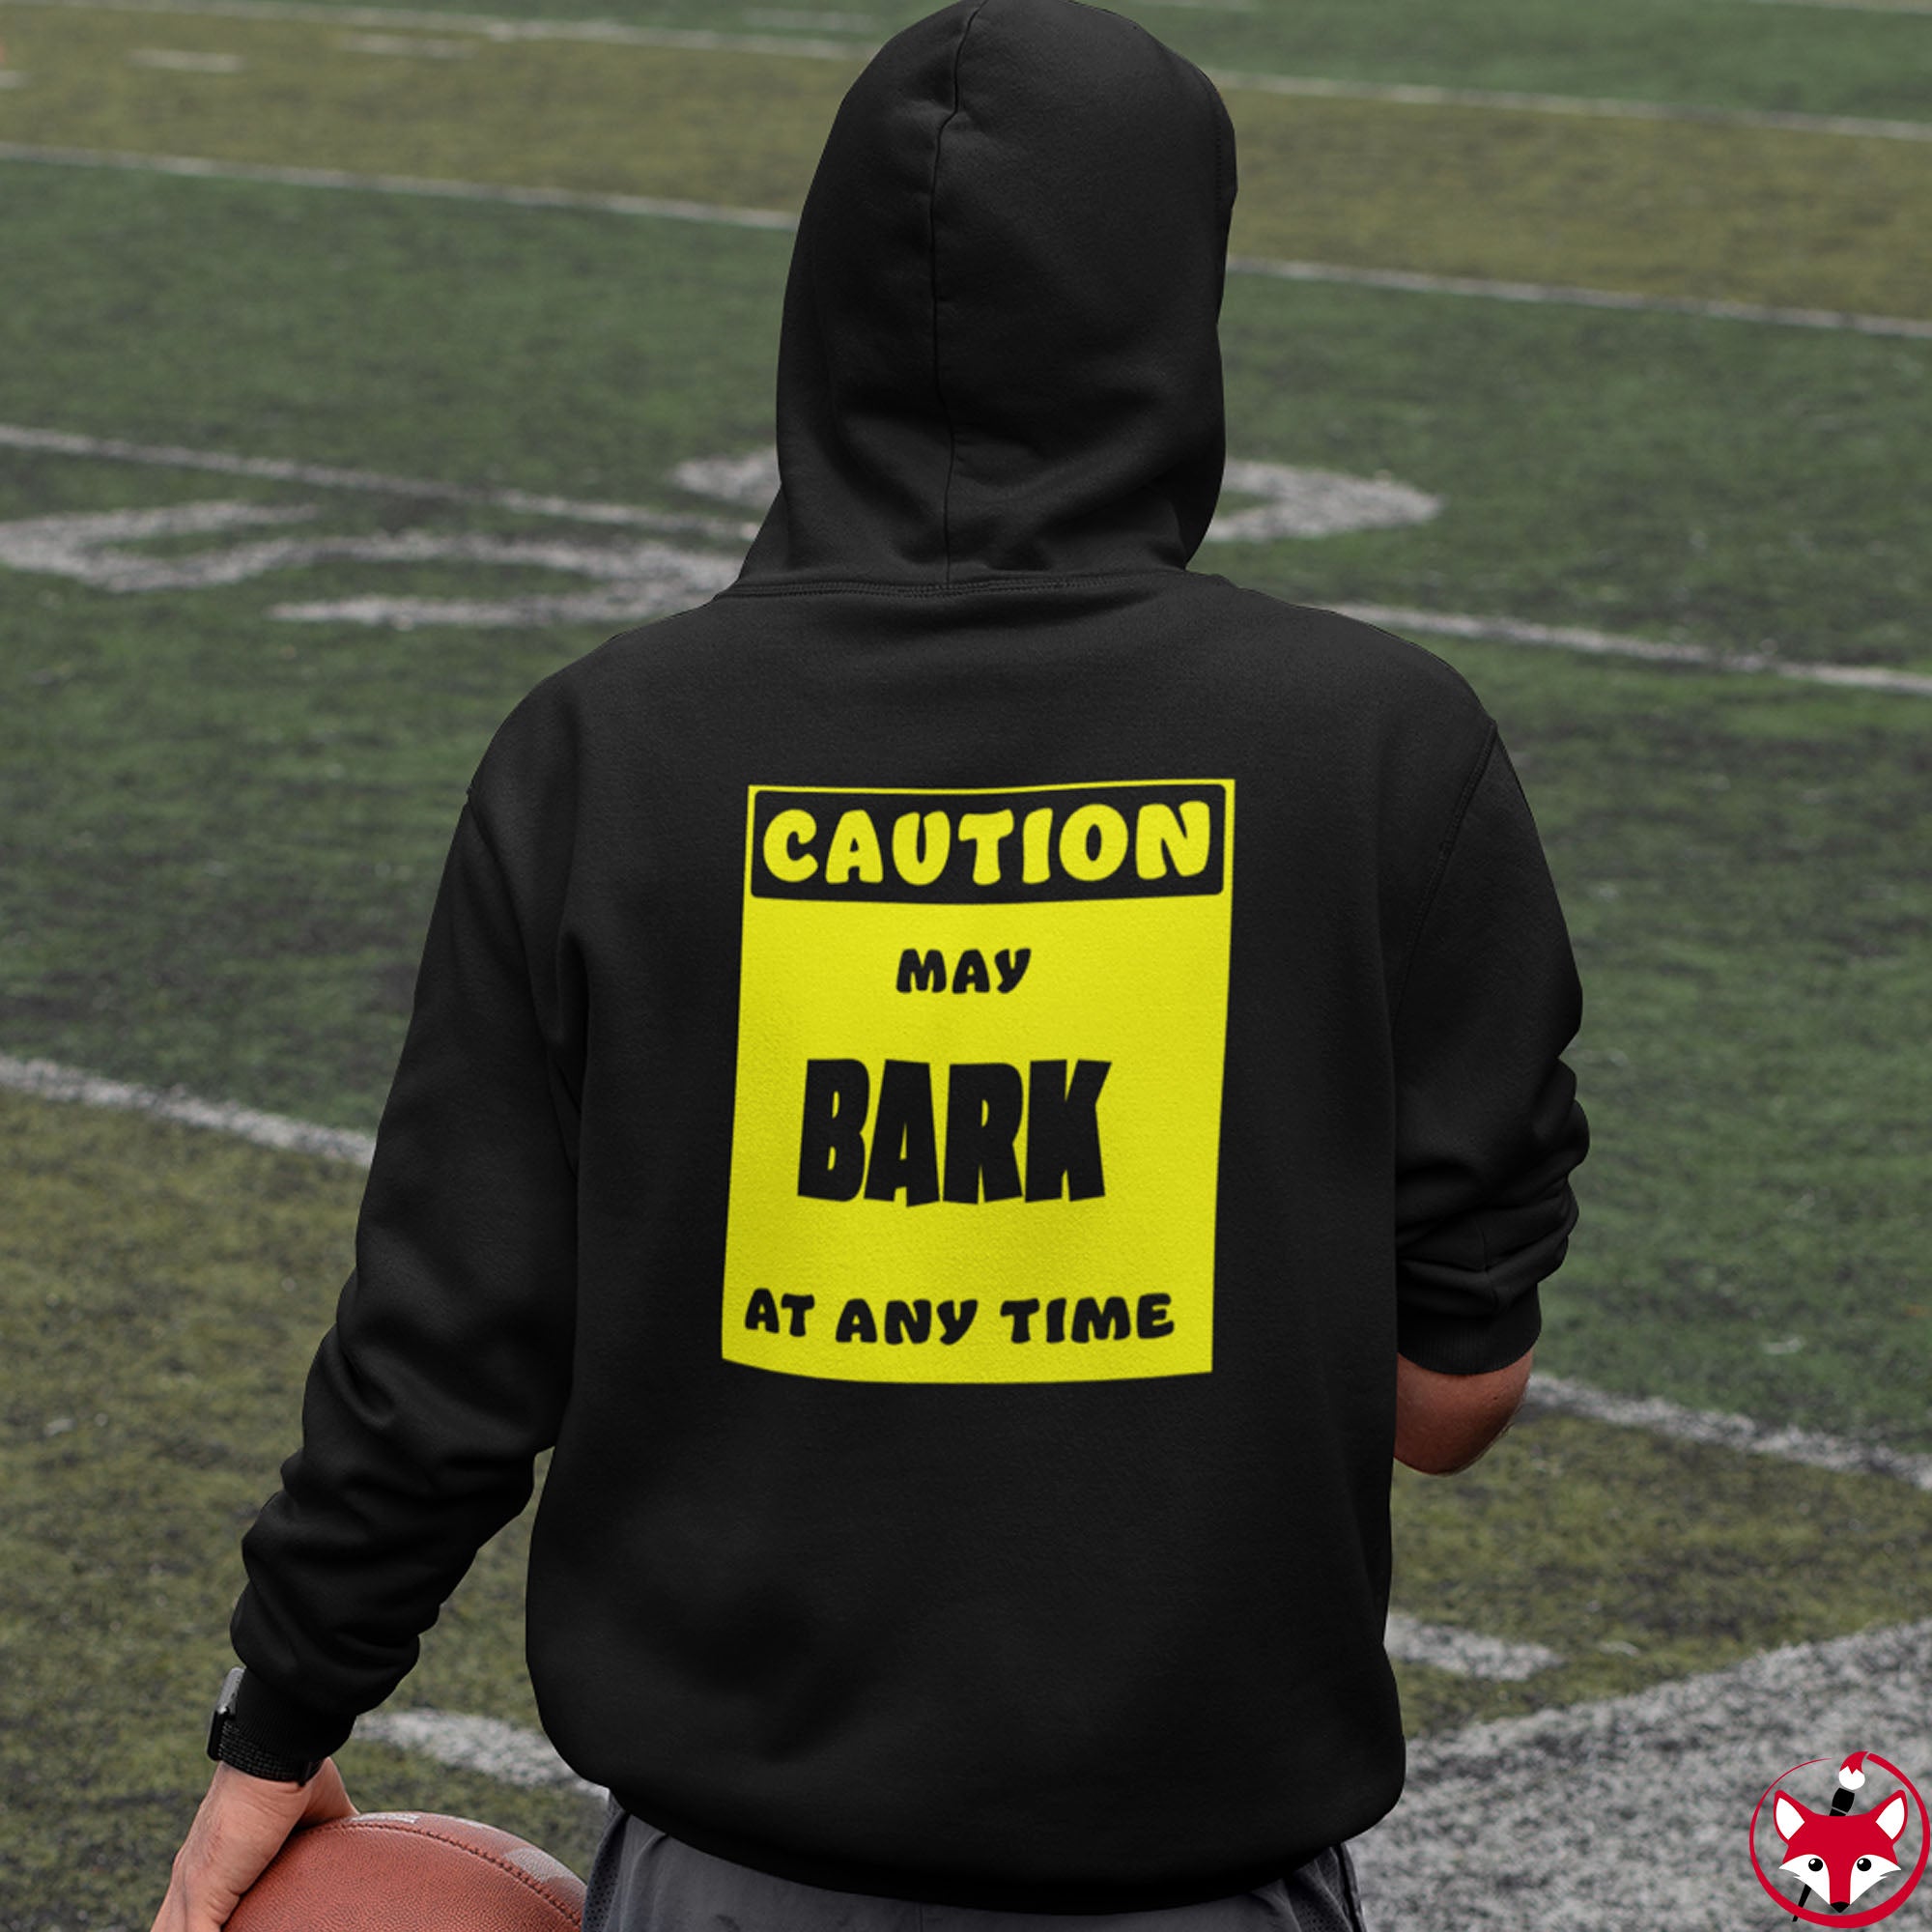 CAUTION! May BARK at any time! - Hoodie Hoodie AFLT-Whootorca 